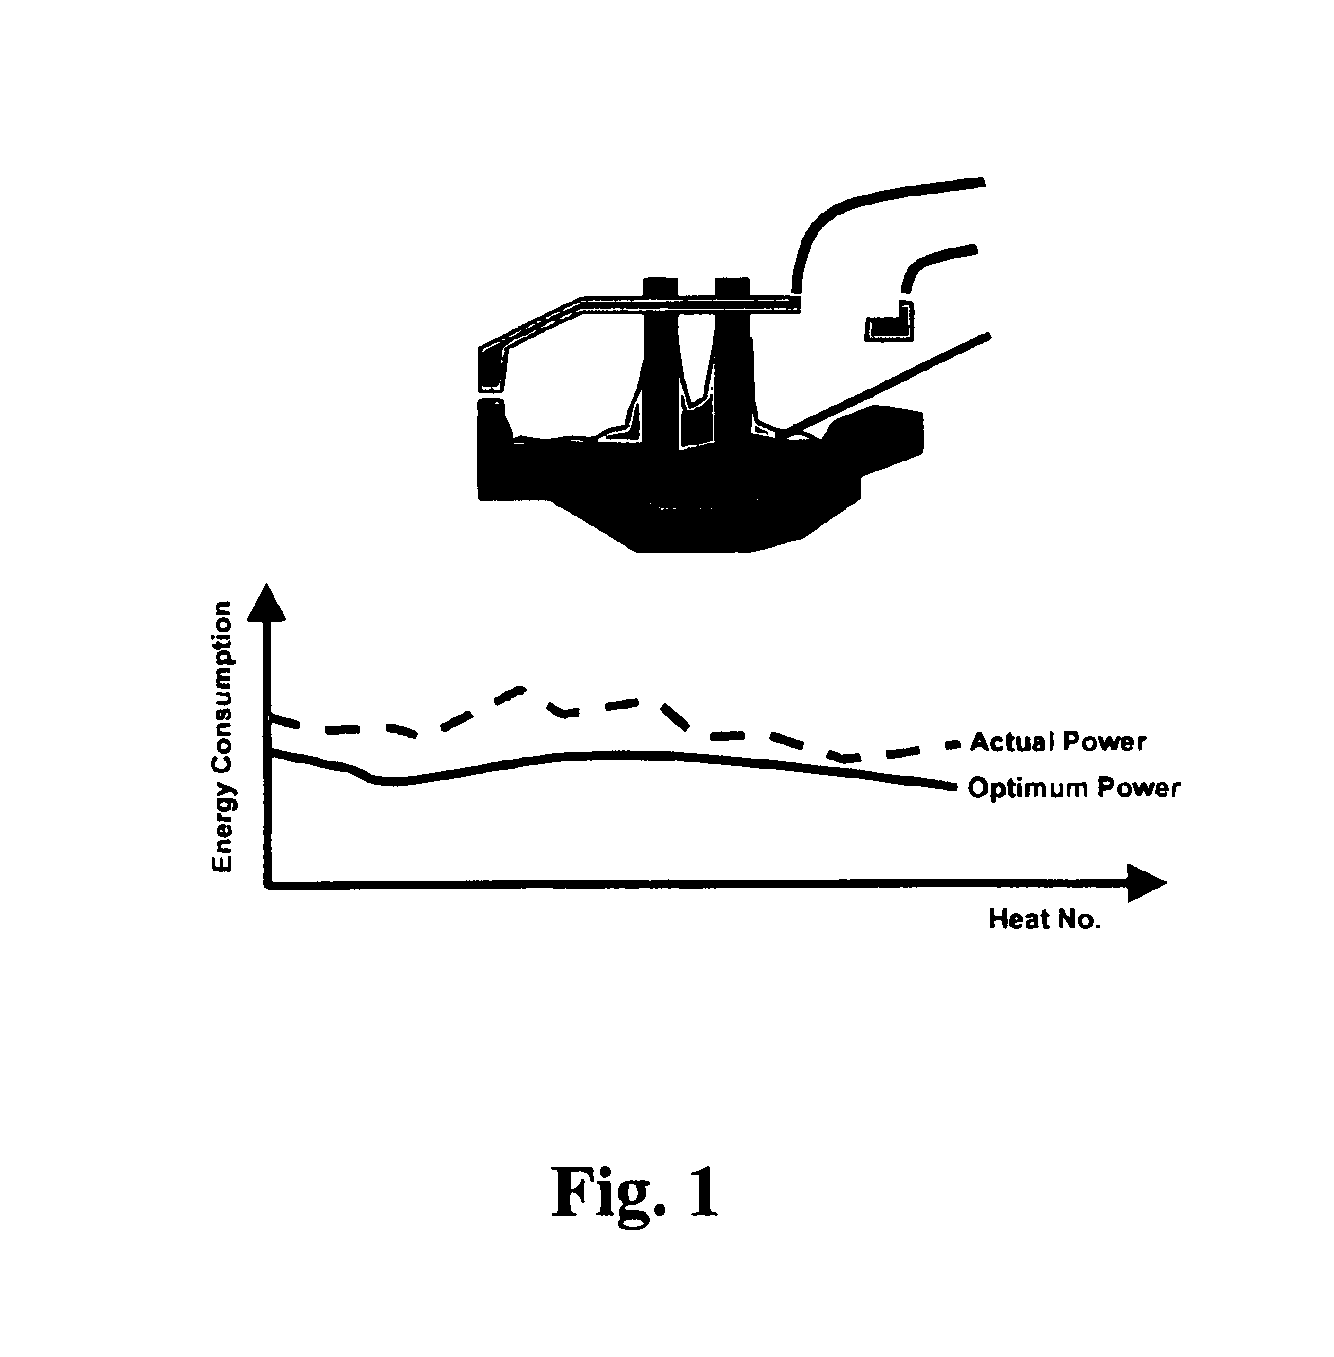 Method for controlling slag characteristics in an electric arc furnace